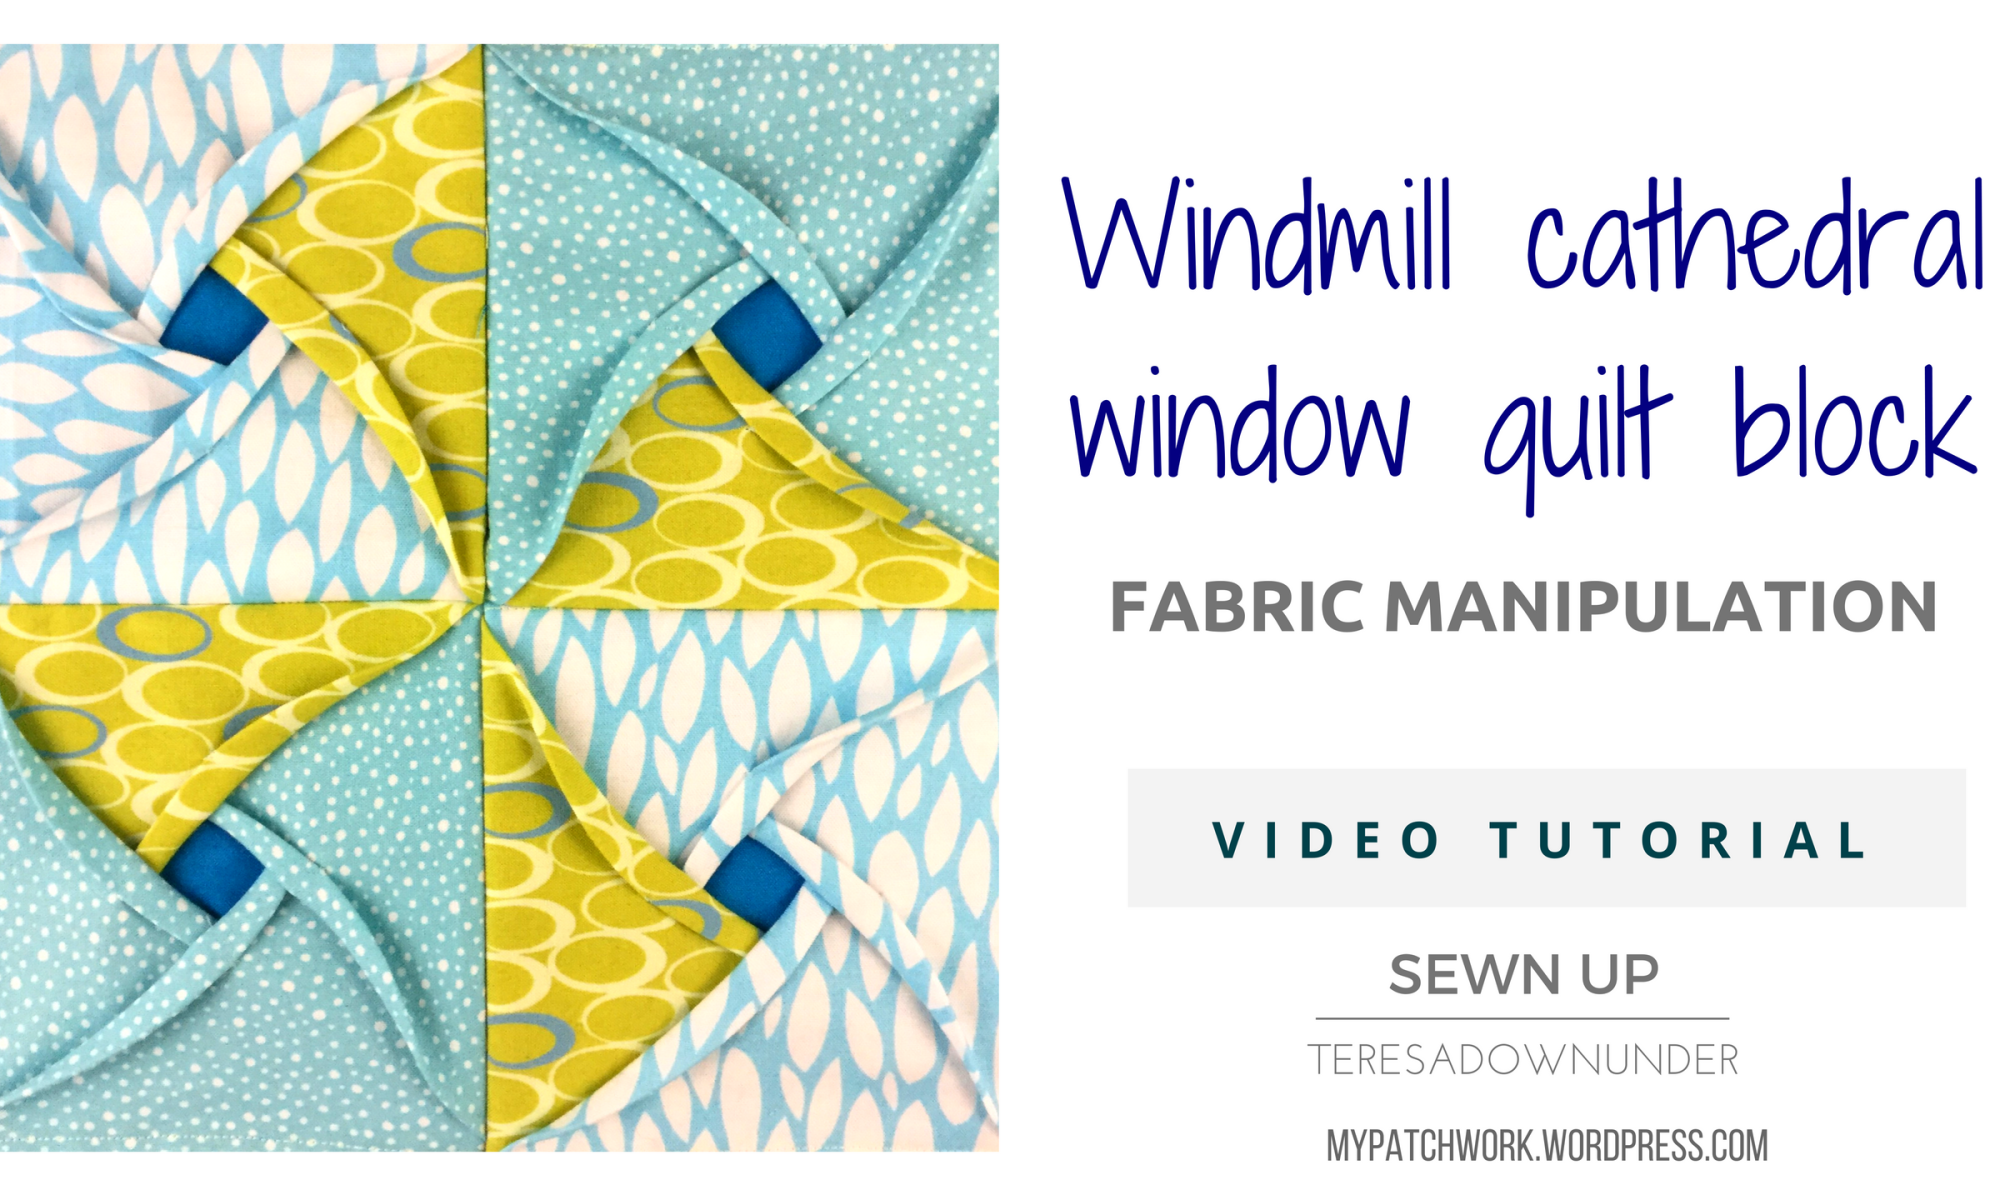 Video tutorial: windmill cathedral window quilt block